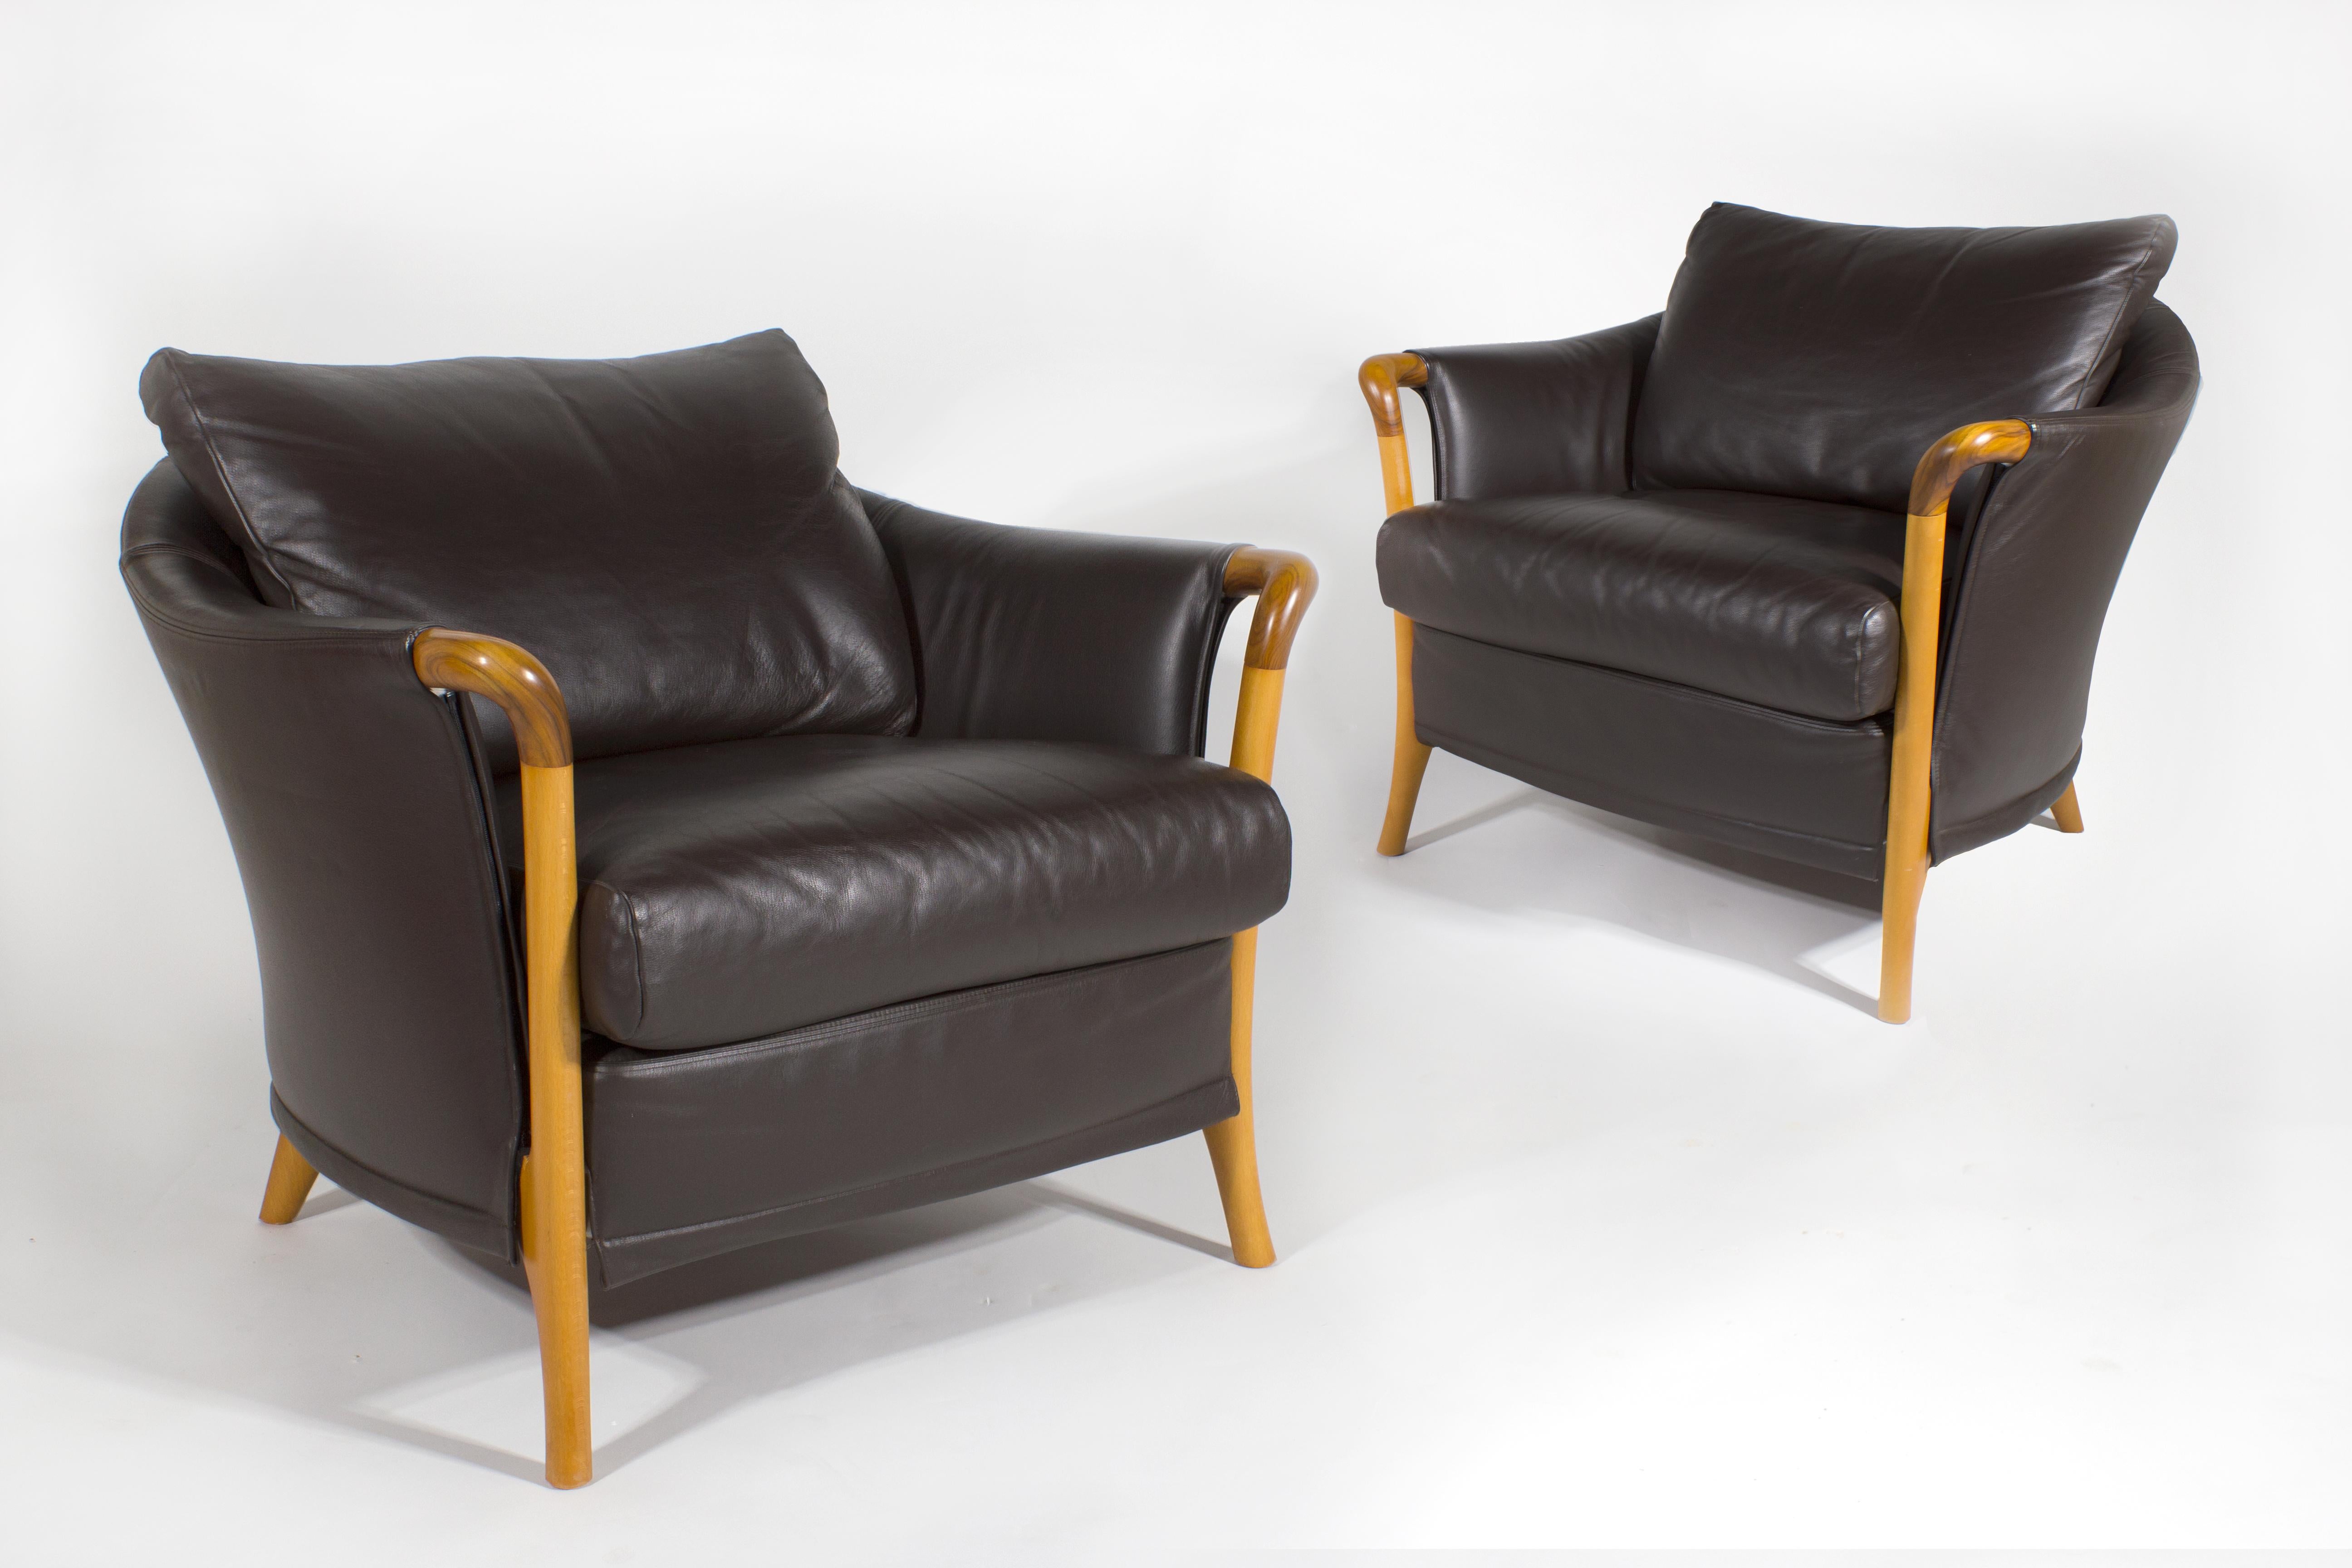 We have two pairs available. The list price is for one Pair.

Designed by Centro Ricerche Giorgetti. The 